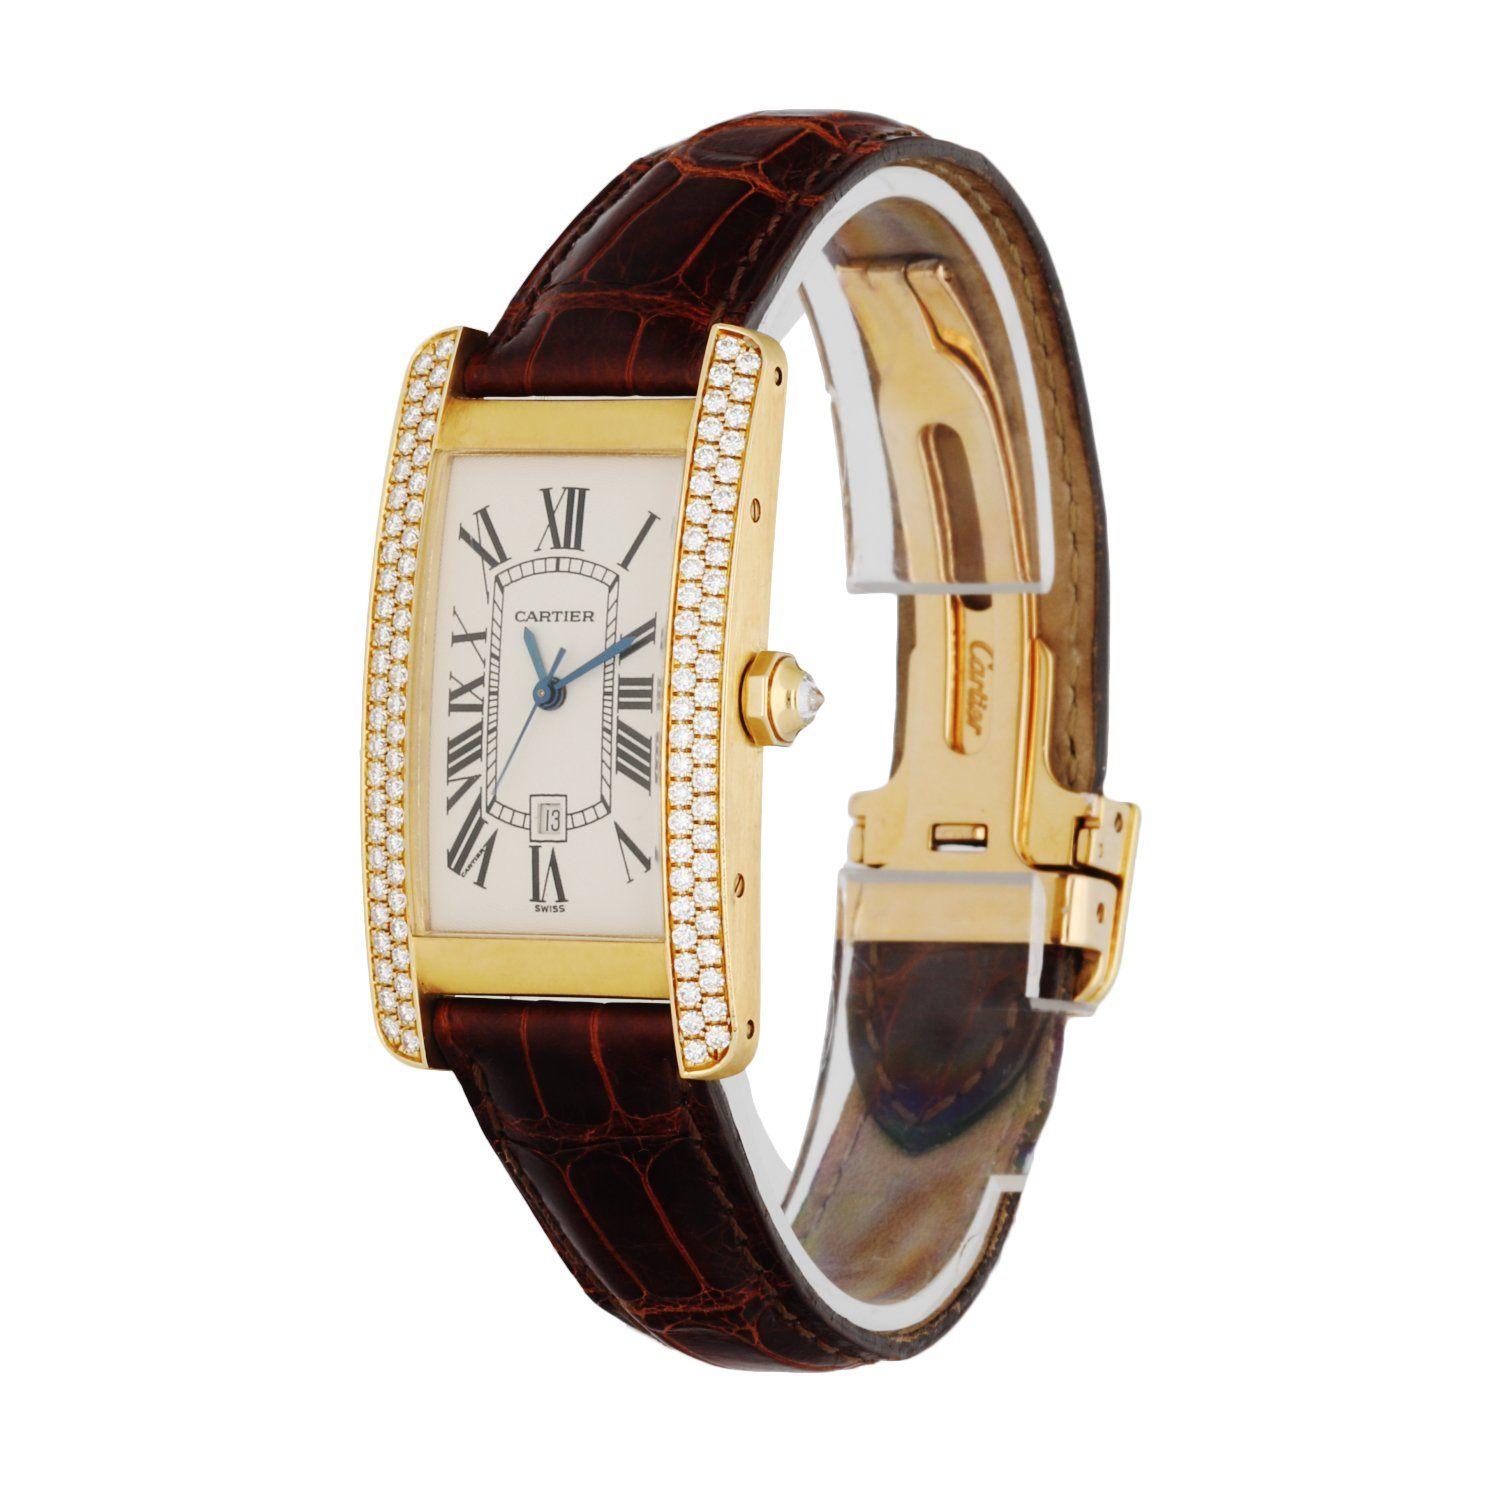 Cartier Tank Americaine 2483 ladies watch. 23mm 18K yellow gold case with factory set diamond bezel. Off-white dial with blue hands and black Roman numerals hour marker. Minute marker in the inner dial. Date display at 6 o'clock position.